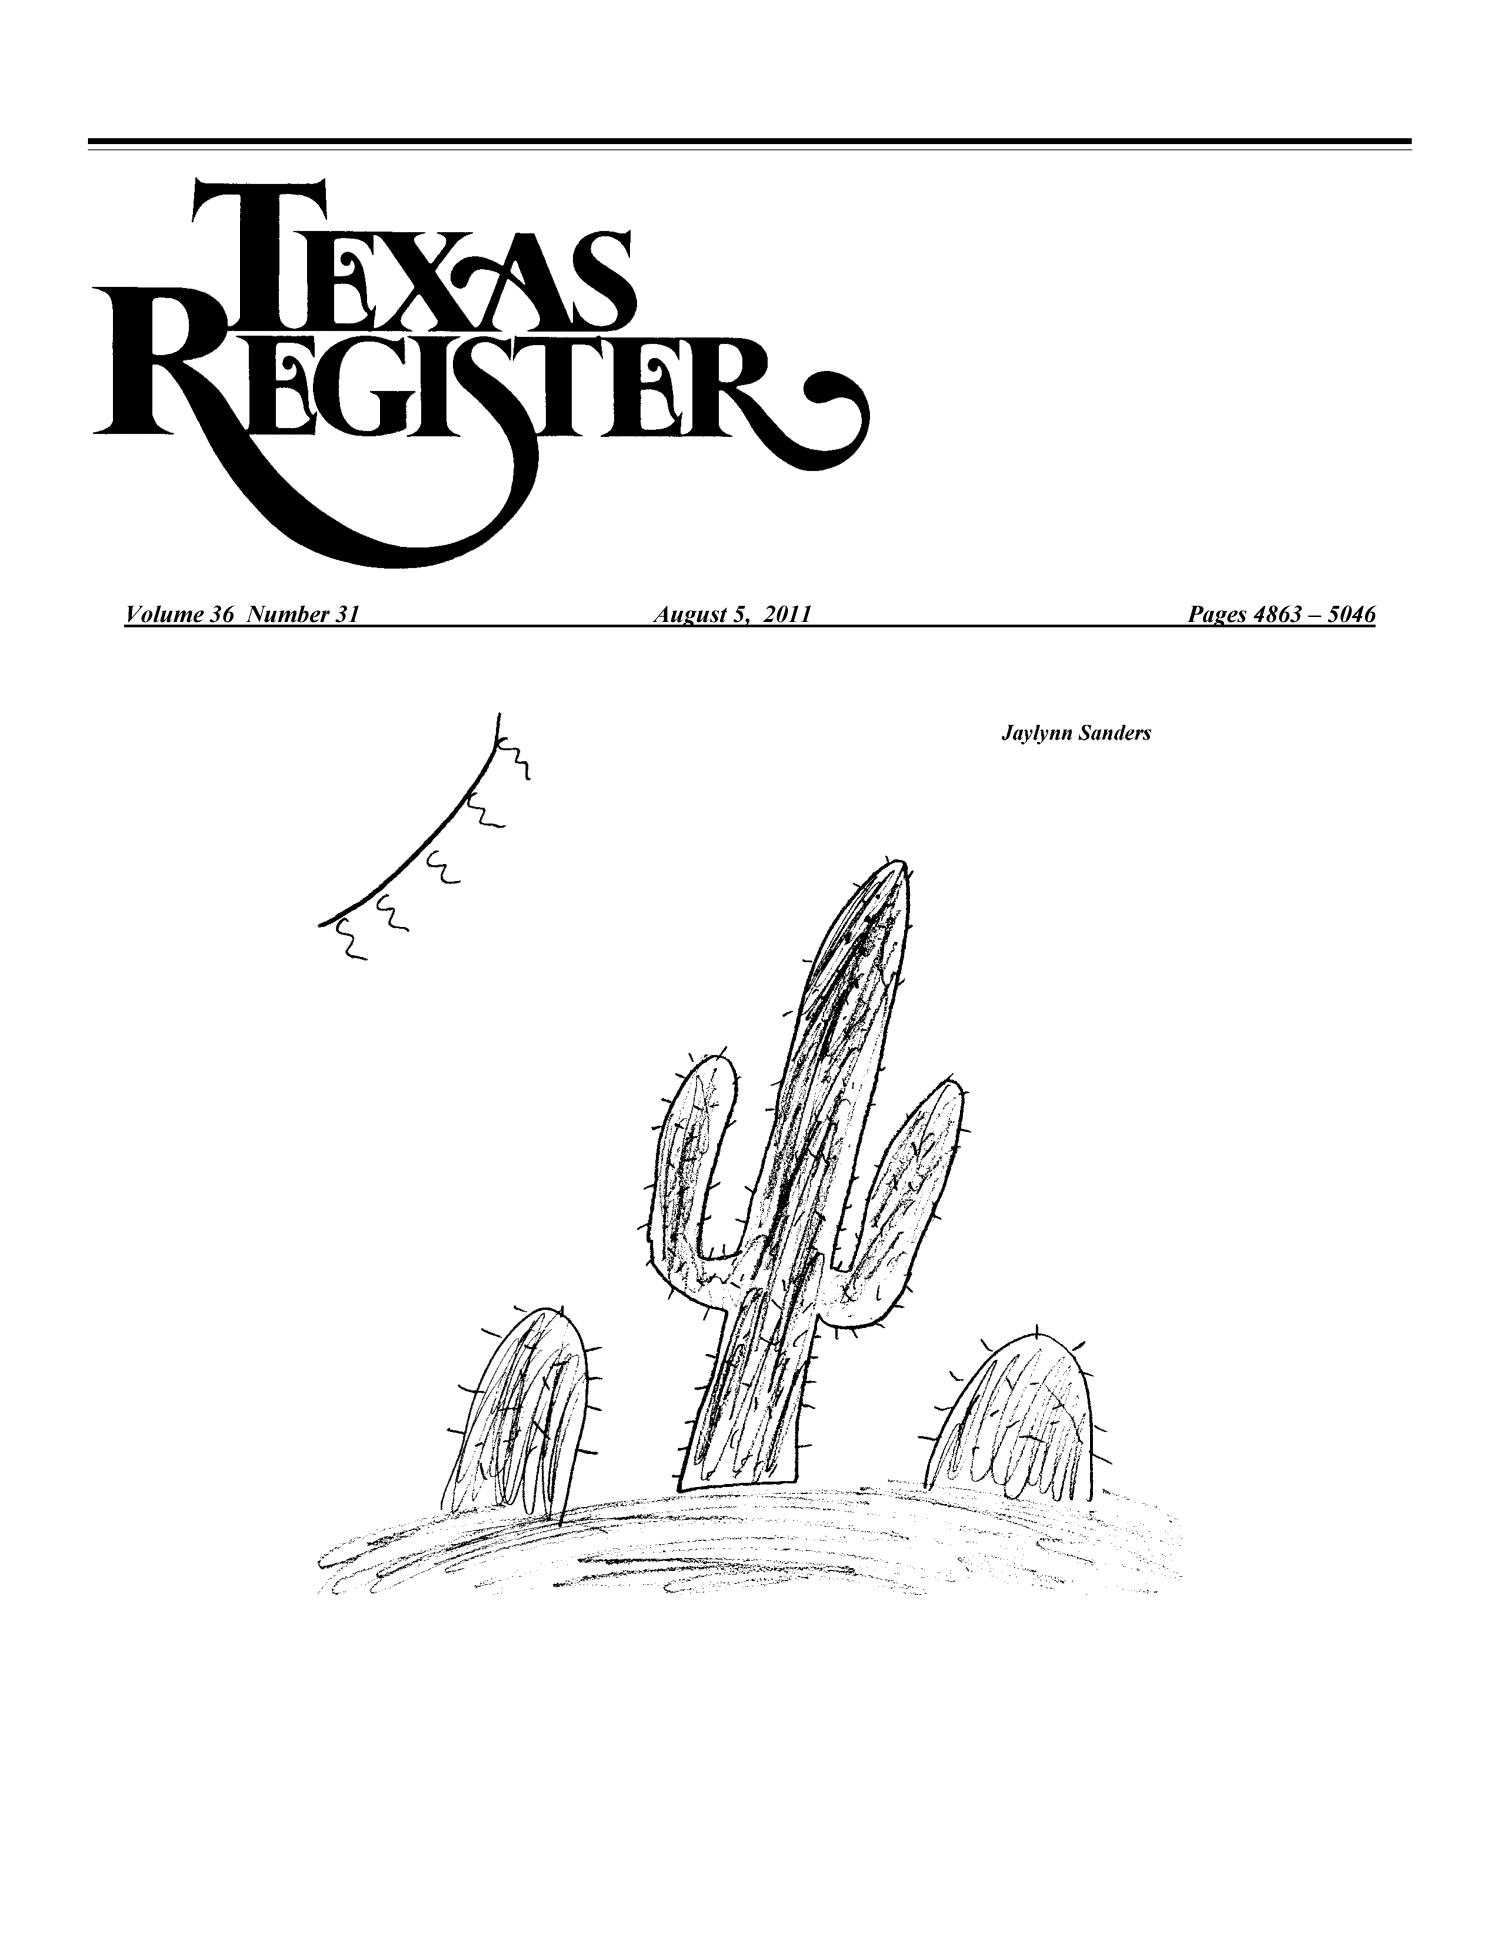 Texas Register, Volume 36, Number 31, Pages 4863-5046, August 5, 2011
                                                
                                                    Title Page
                                                